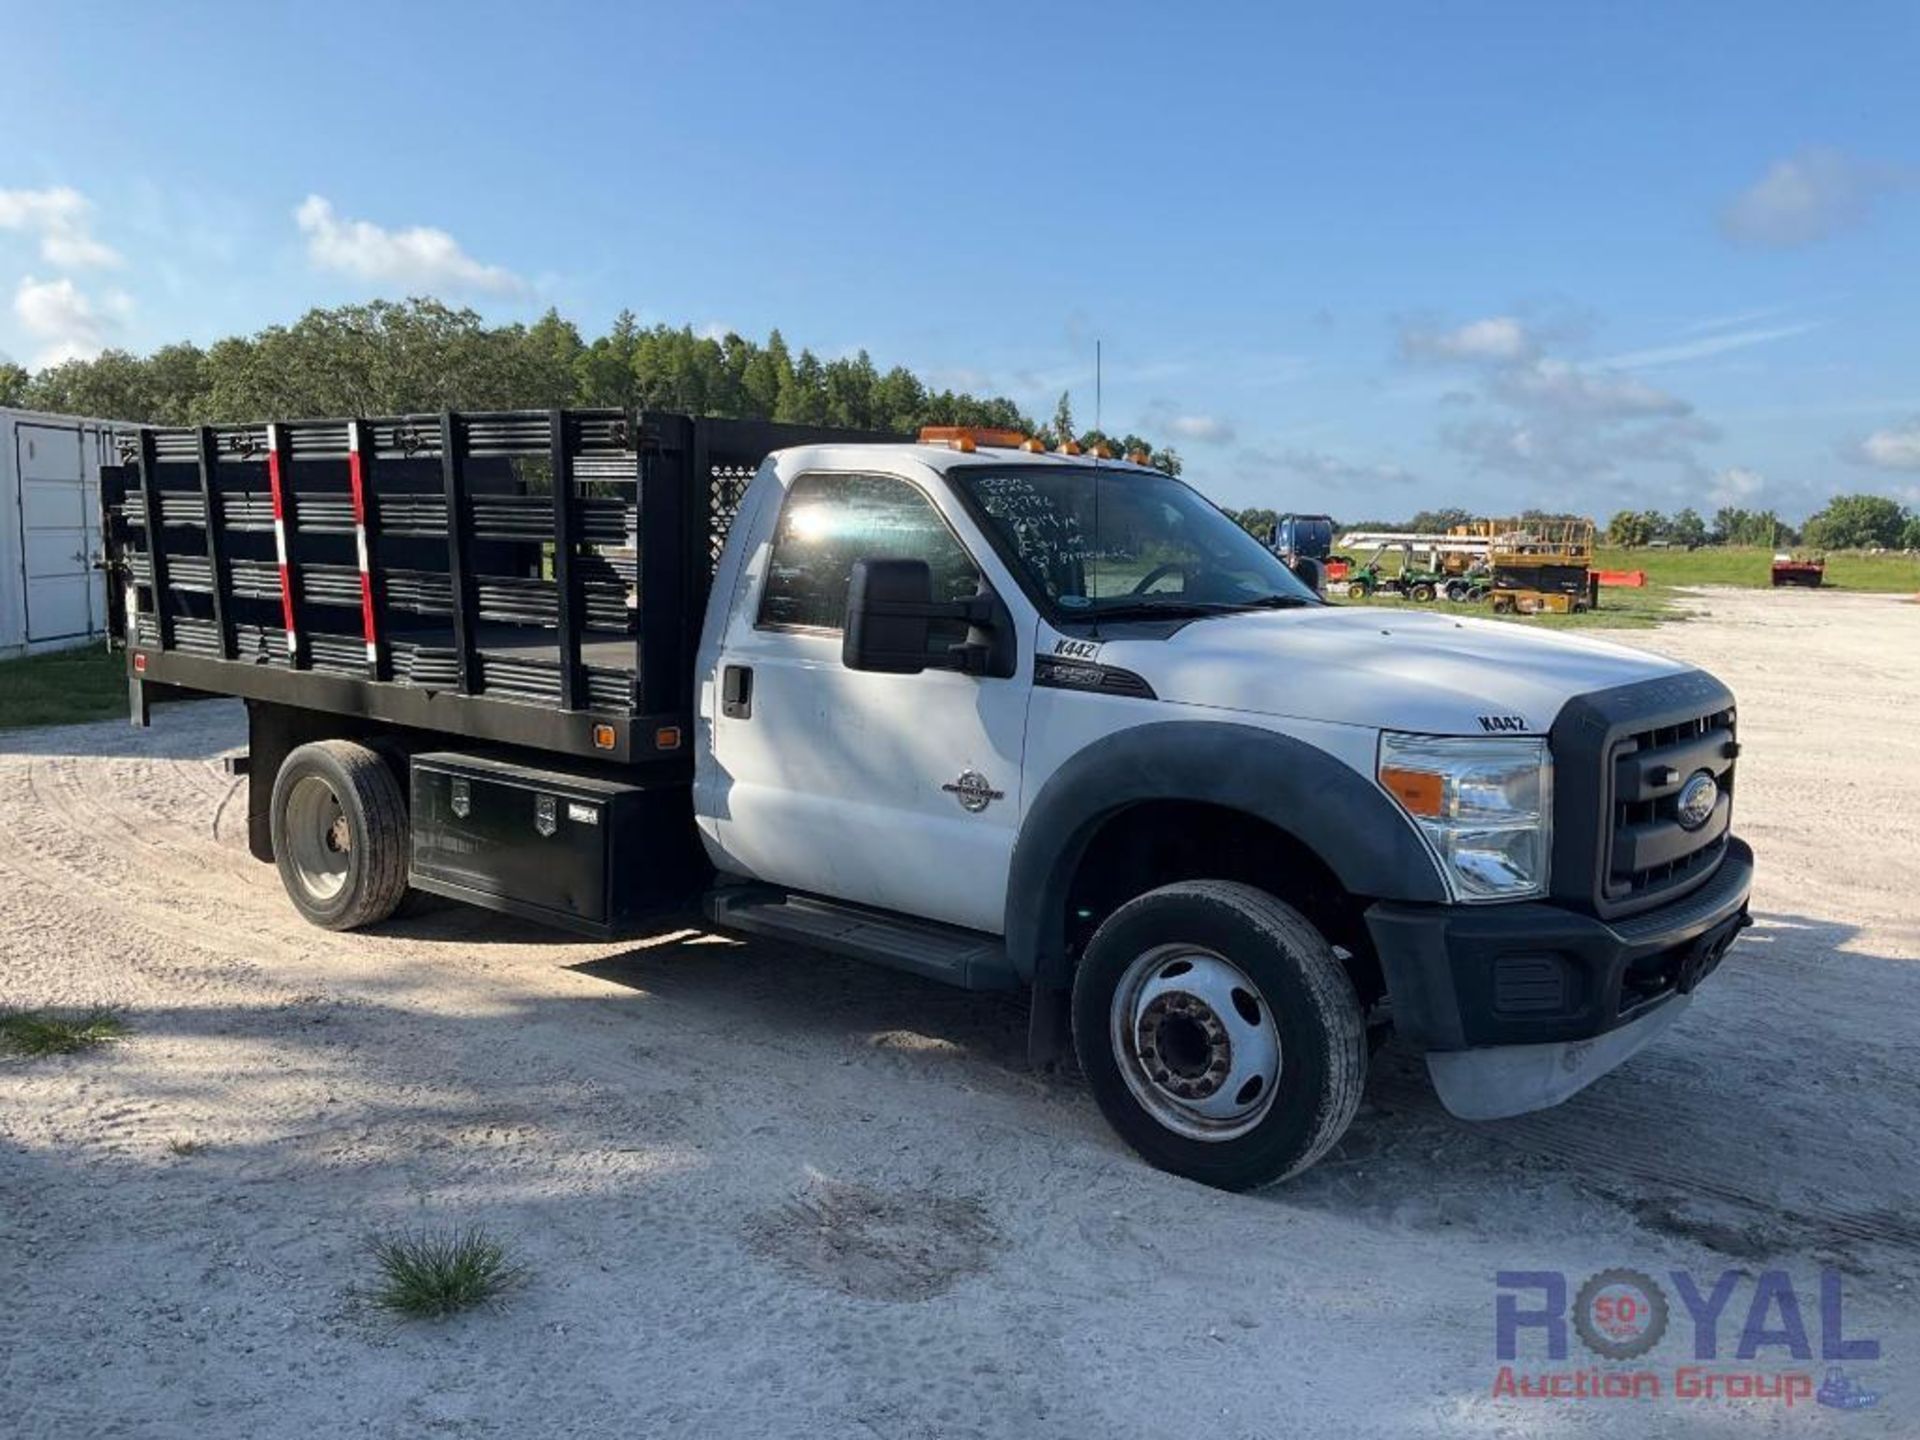 2014 Ford F-550 Flat Bed Stake Body Truck - Image 2 of 24